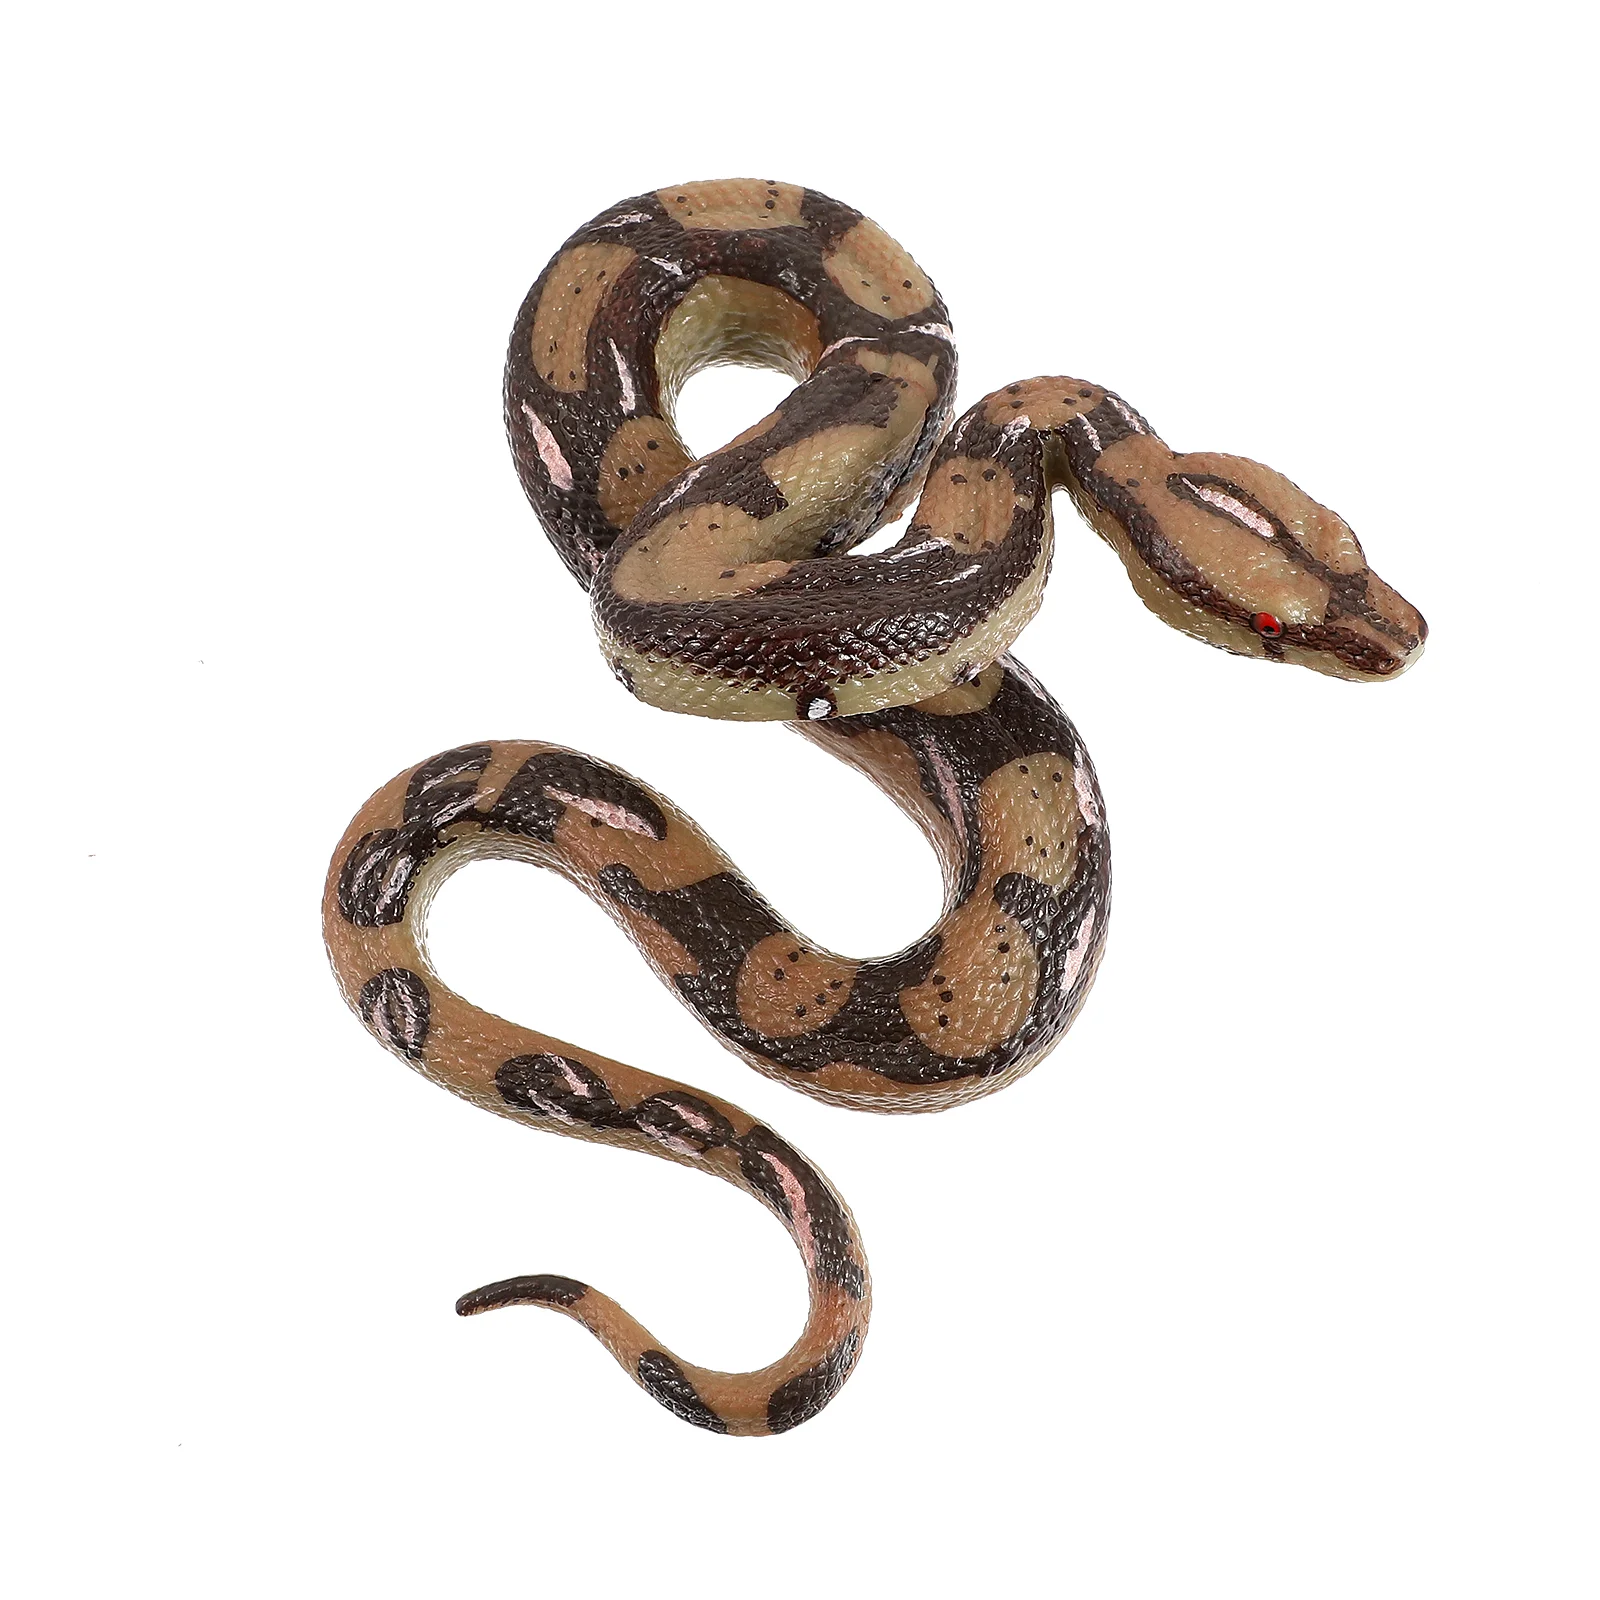 

Snake Rubber Snake Python Model Scary Perfect for